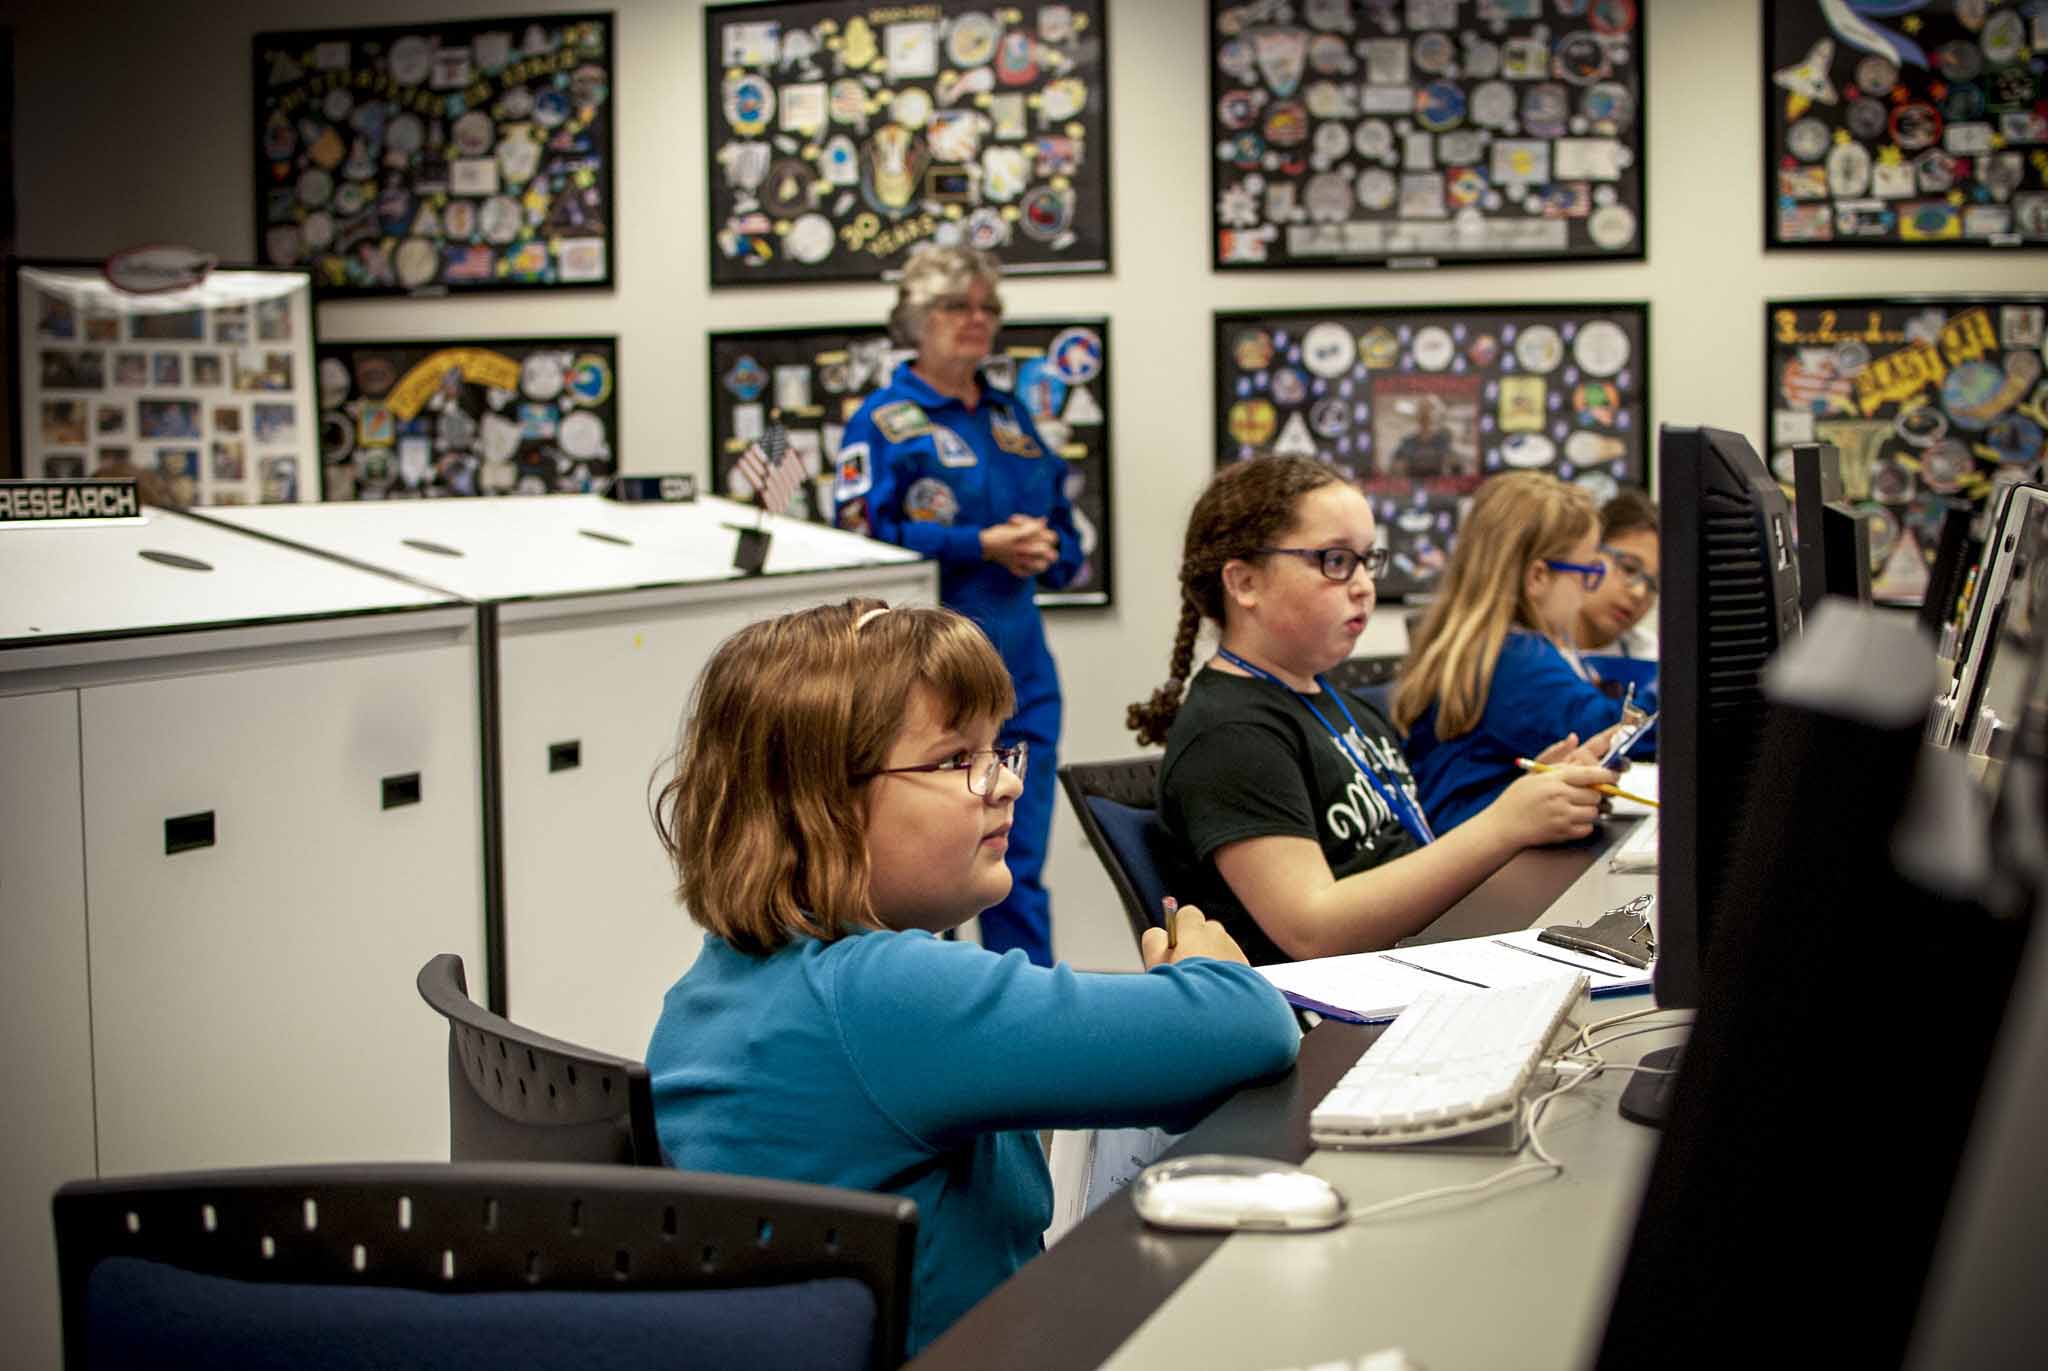 Girls at the Challenger Learning Center working on computers